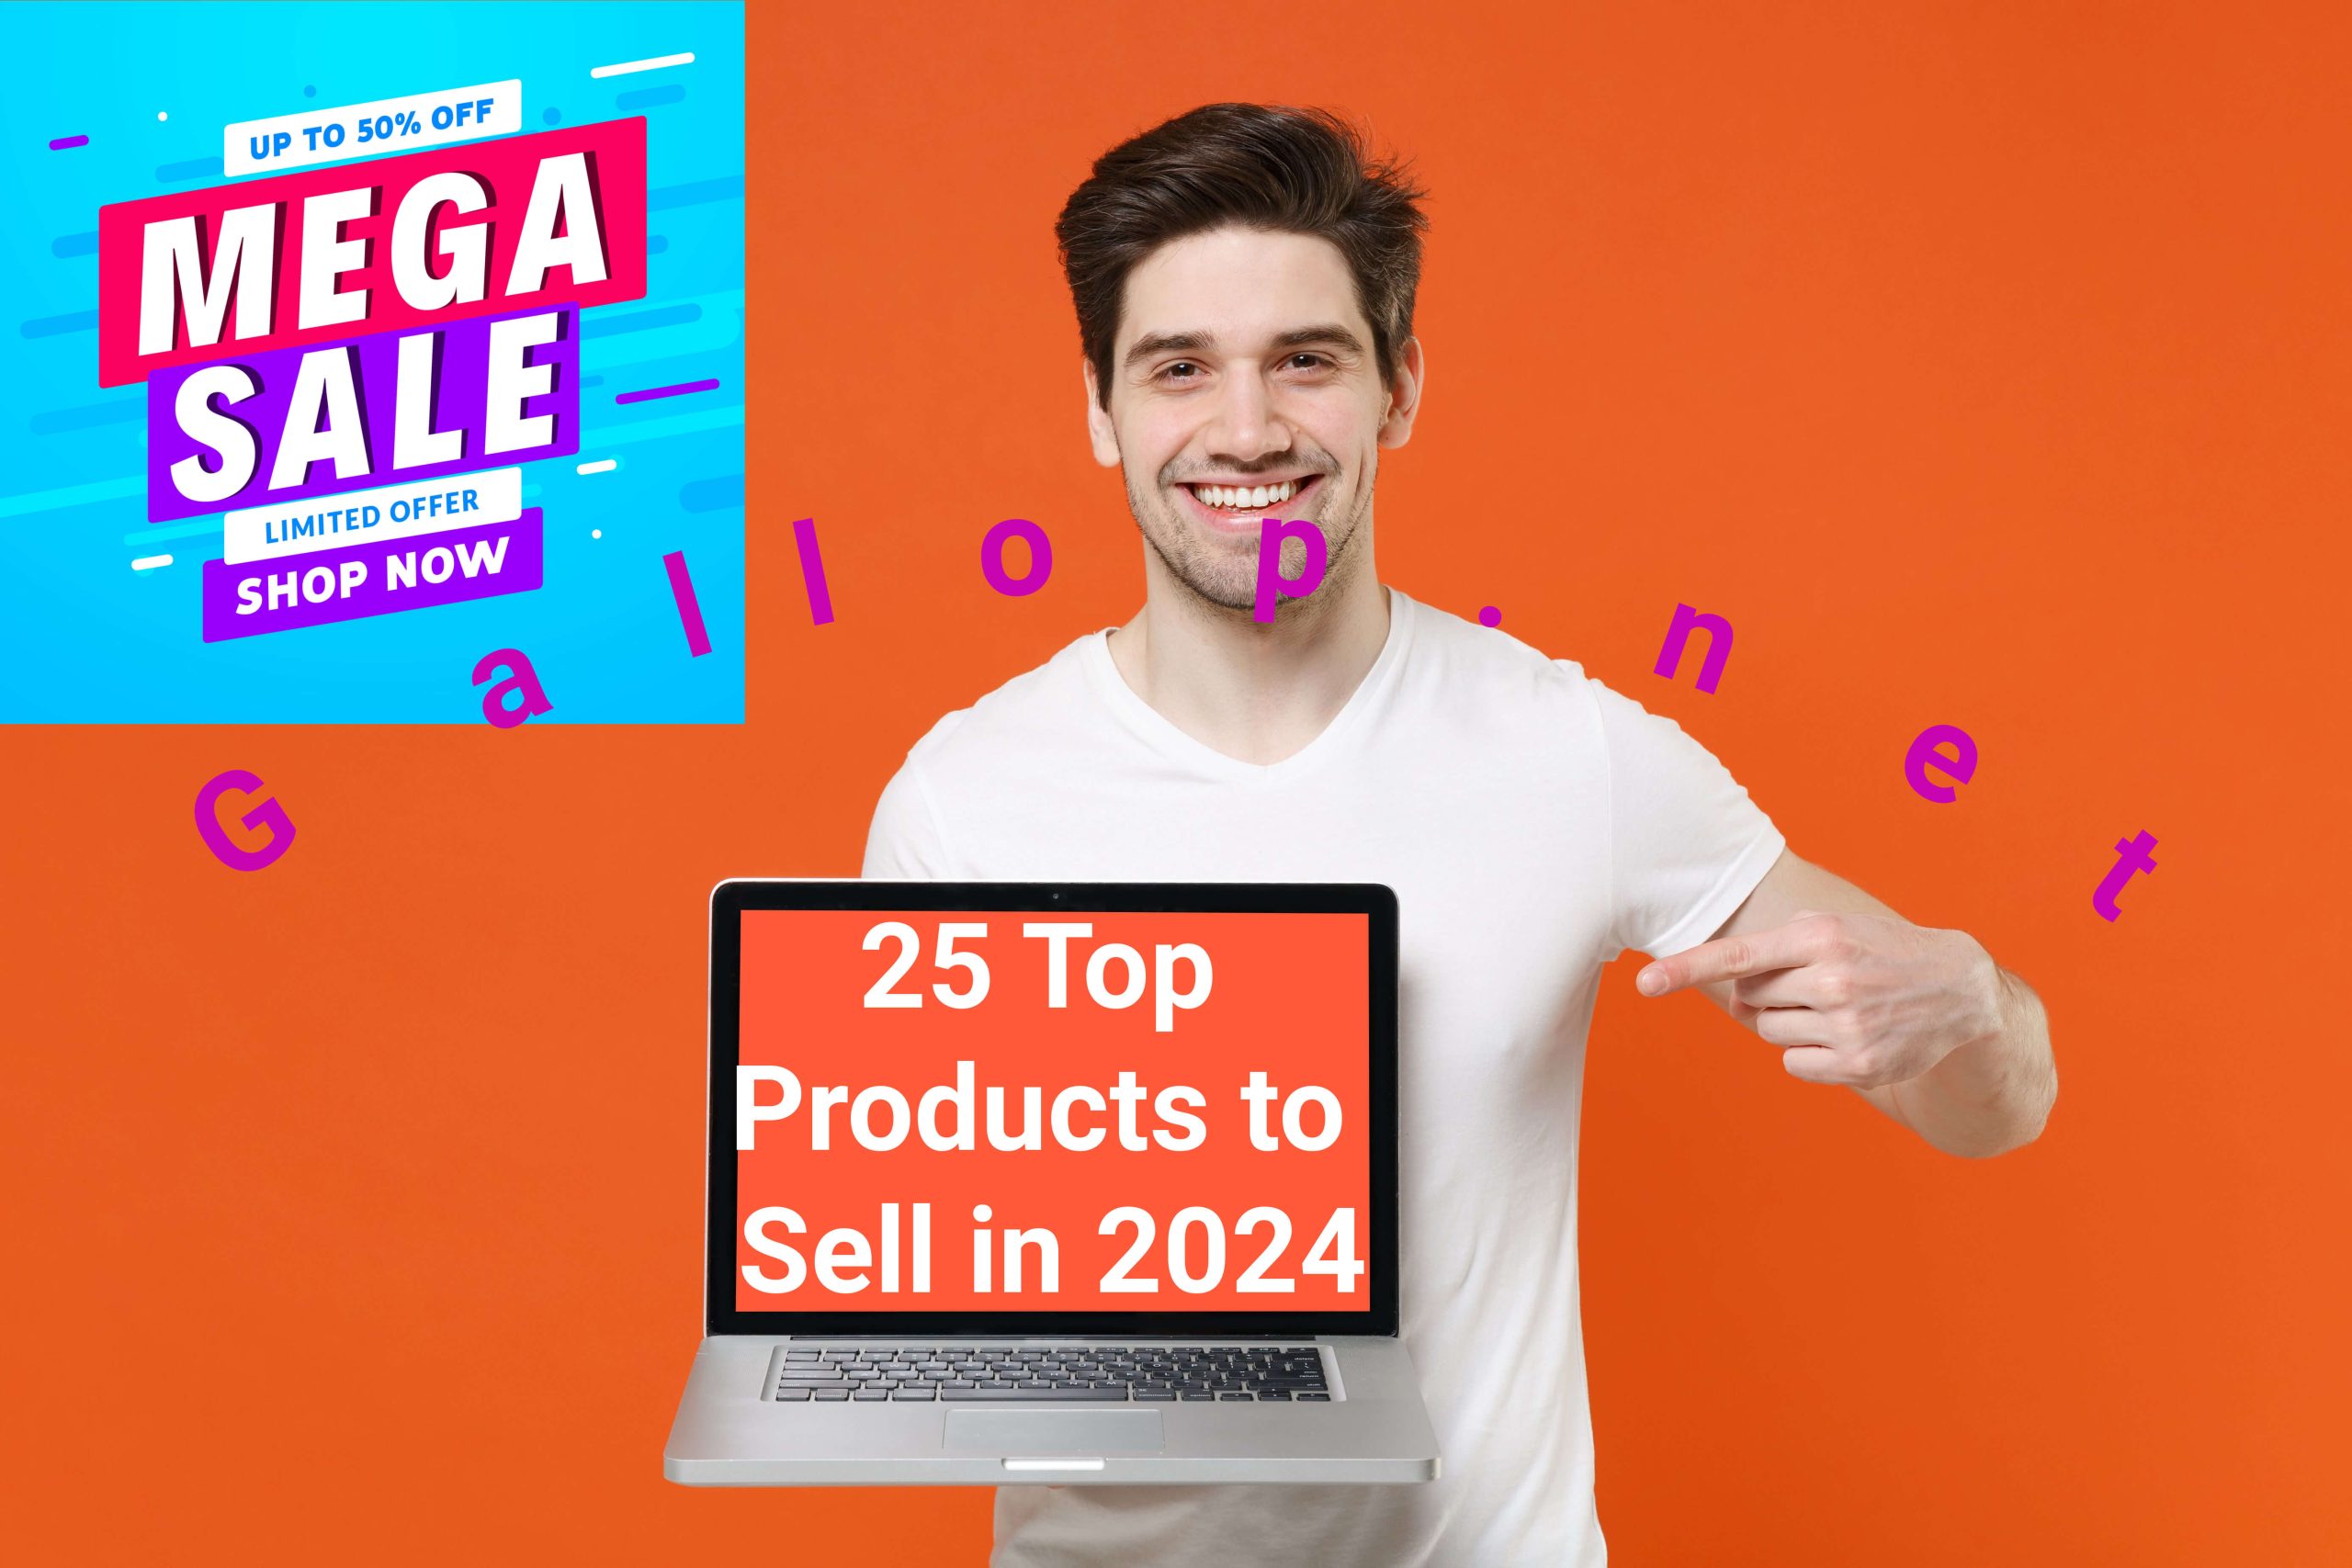 14 Most Popular Digital Products To Sell in 2024